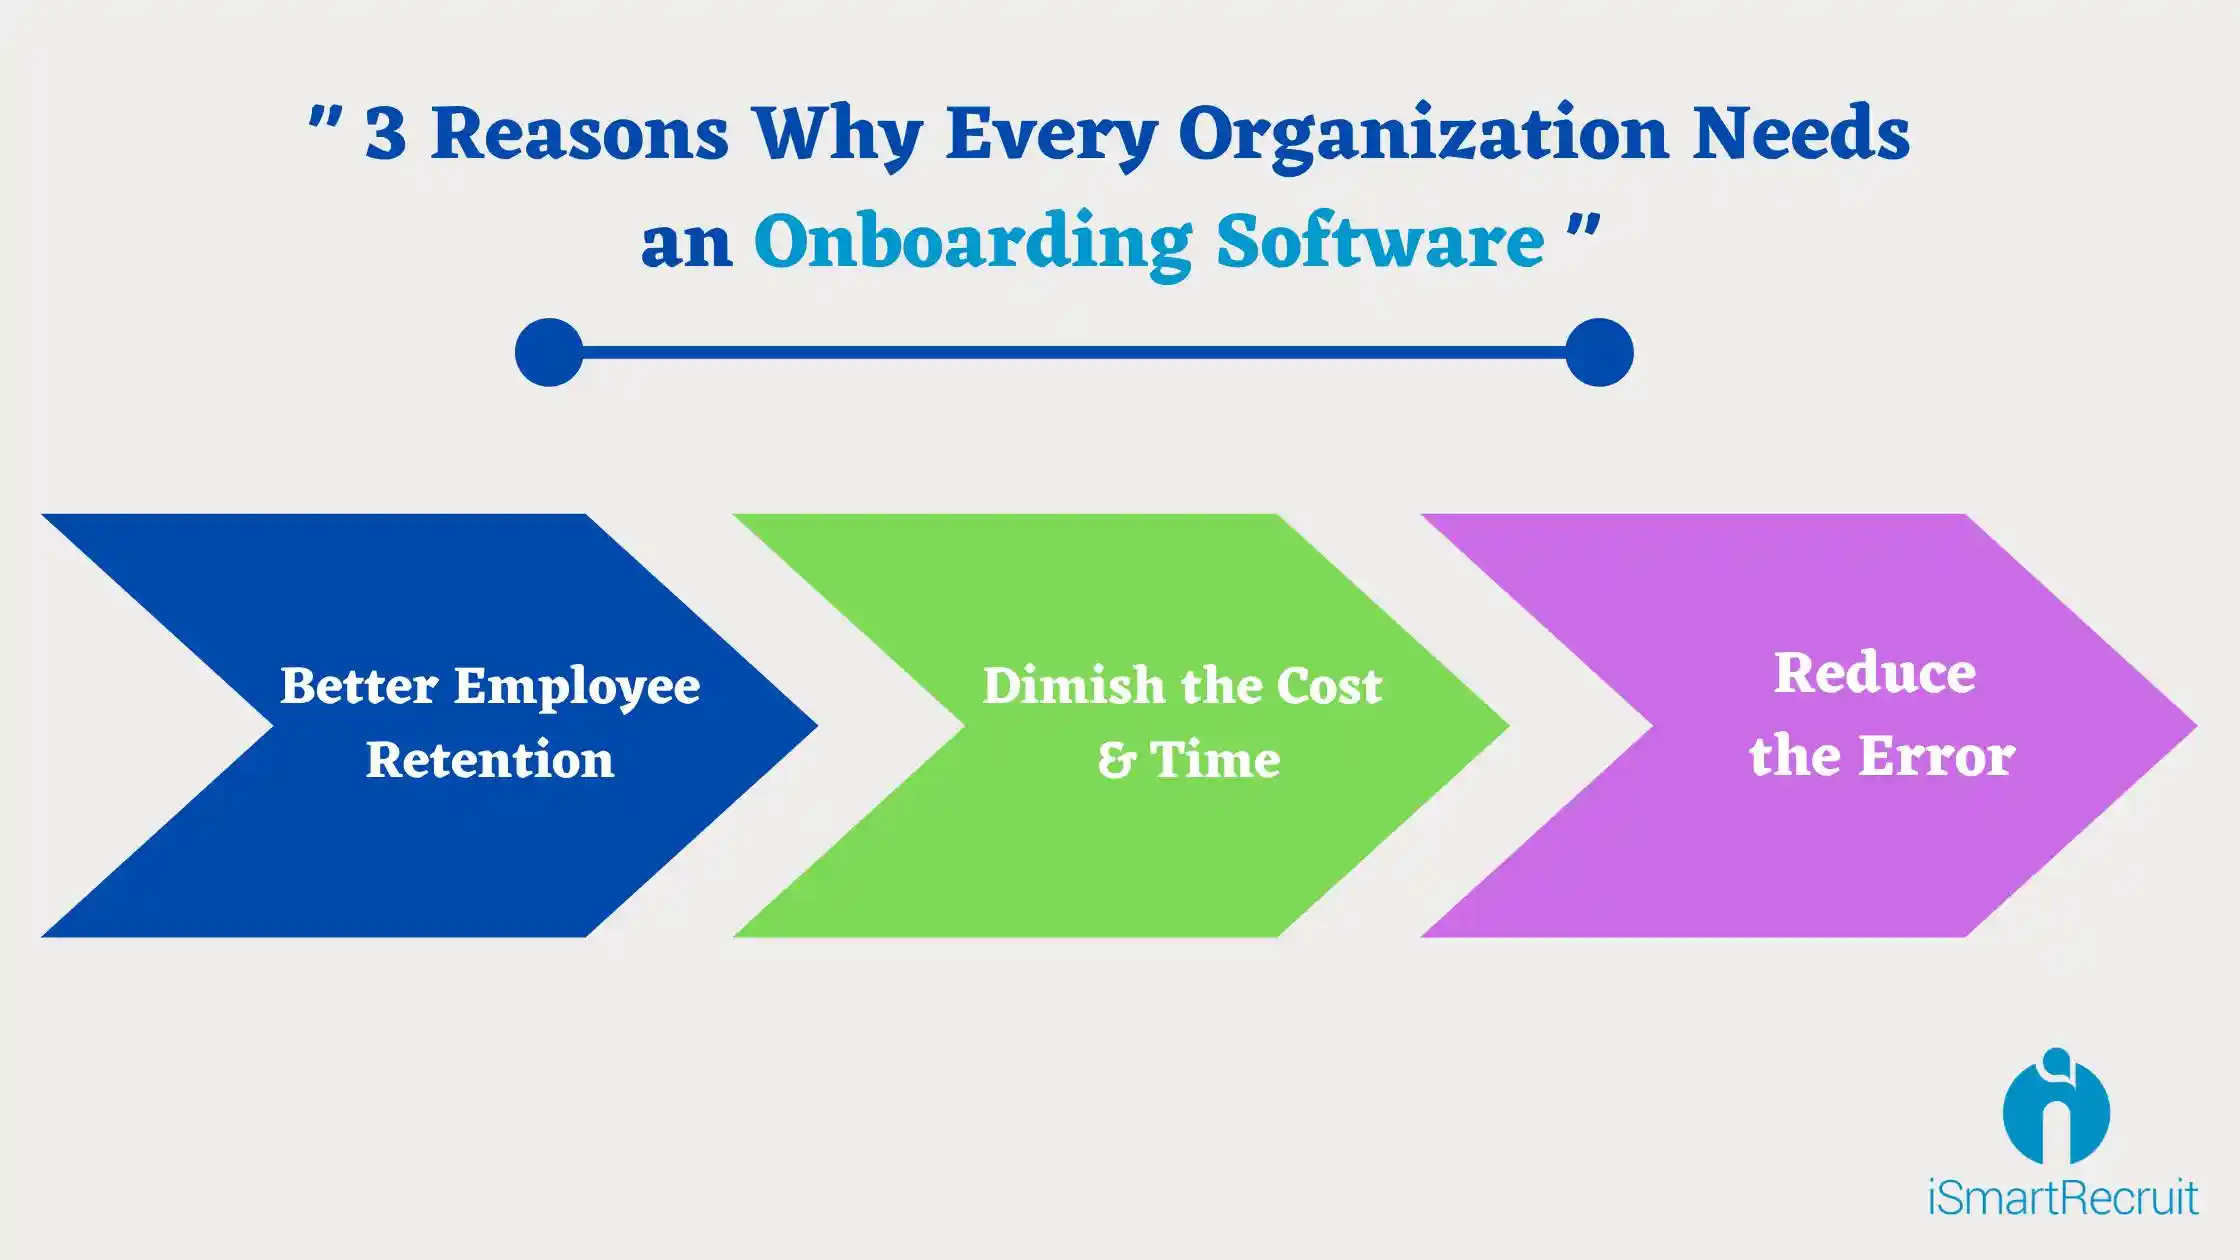 Why Every Organization Needs an Onboarding Software